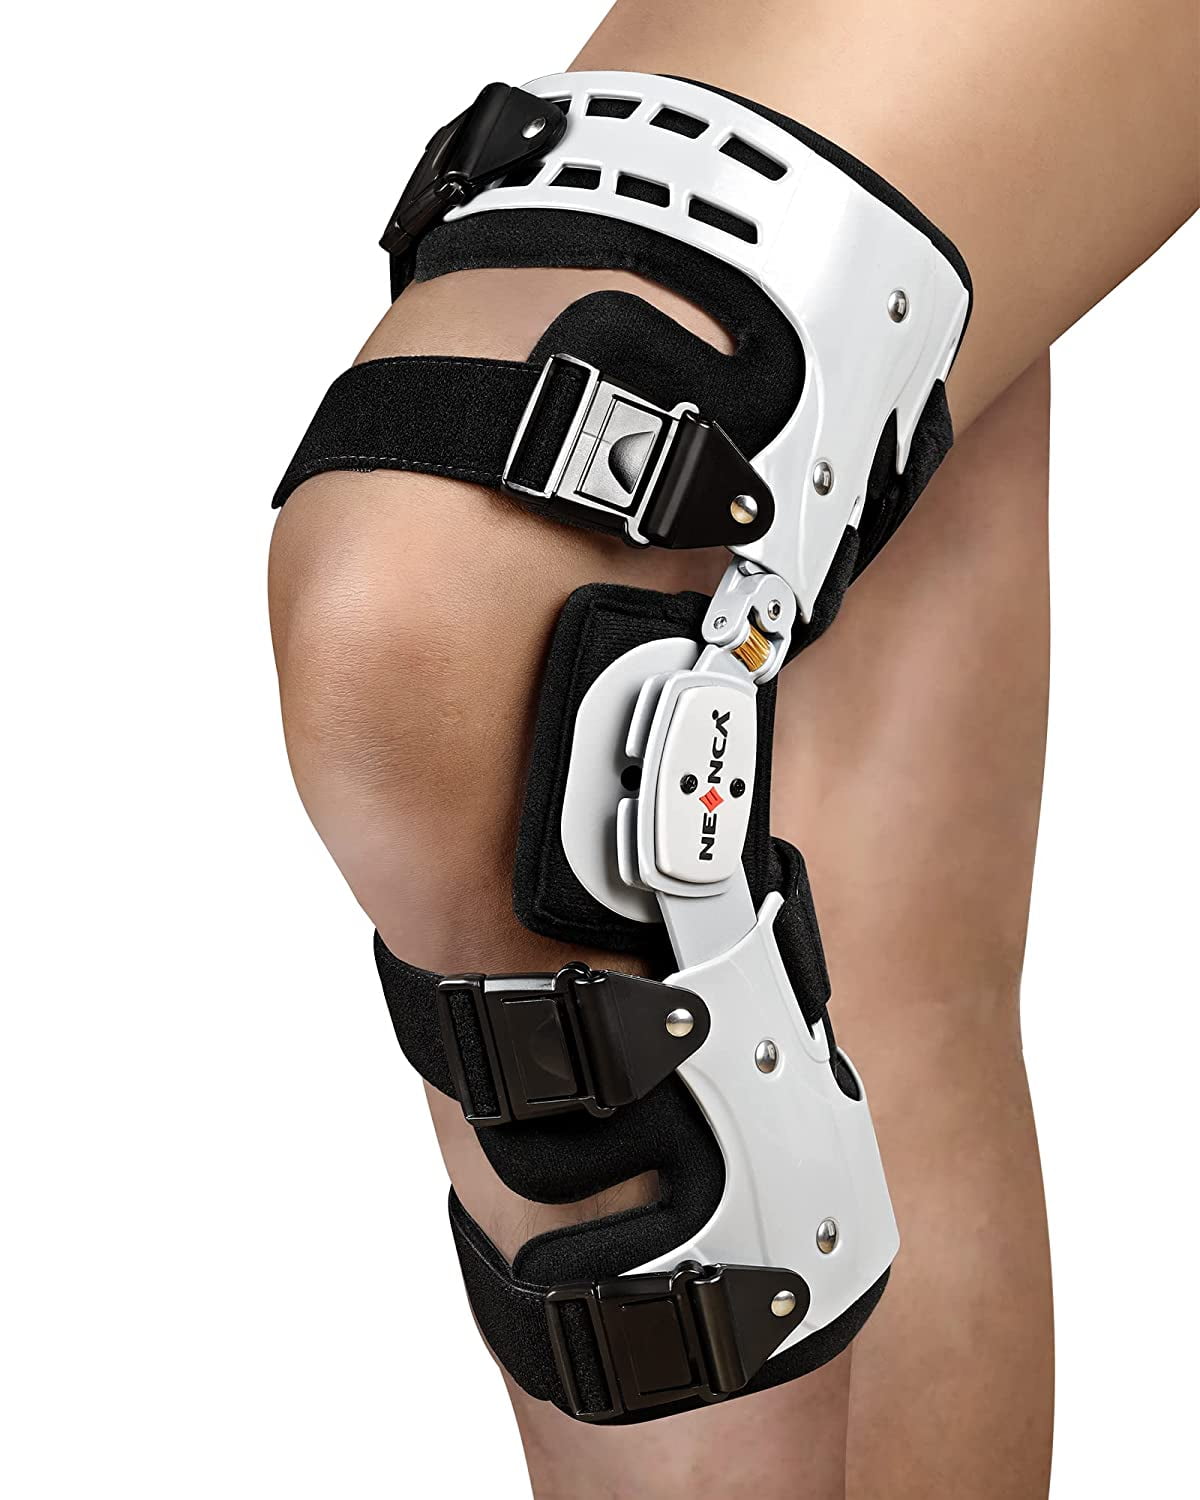 NEENCA Professional Medical Knee Brace,Suitable for Men and Women